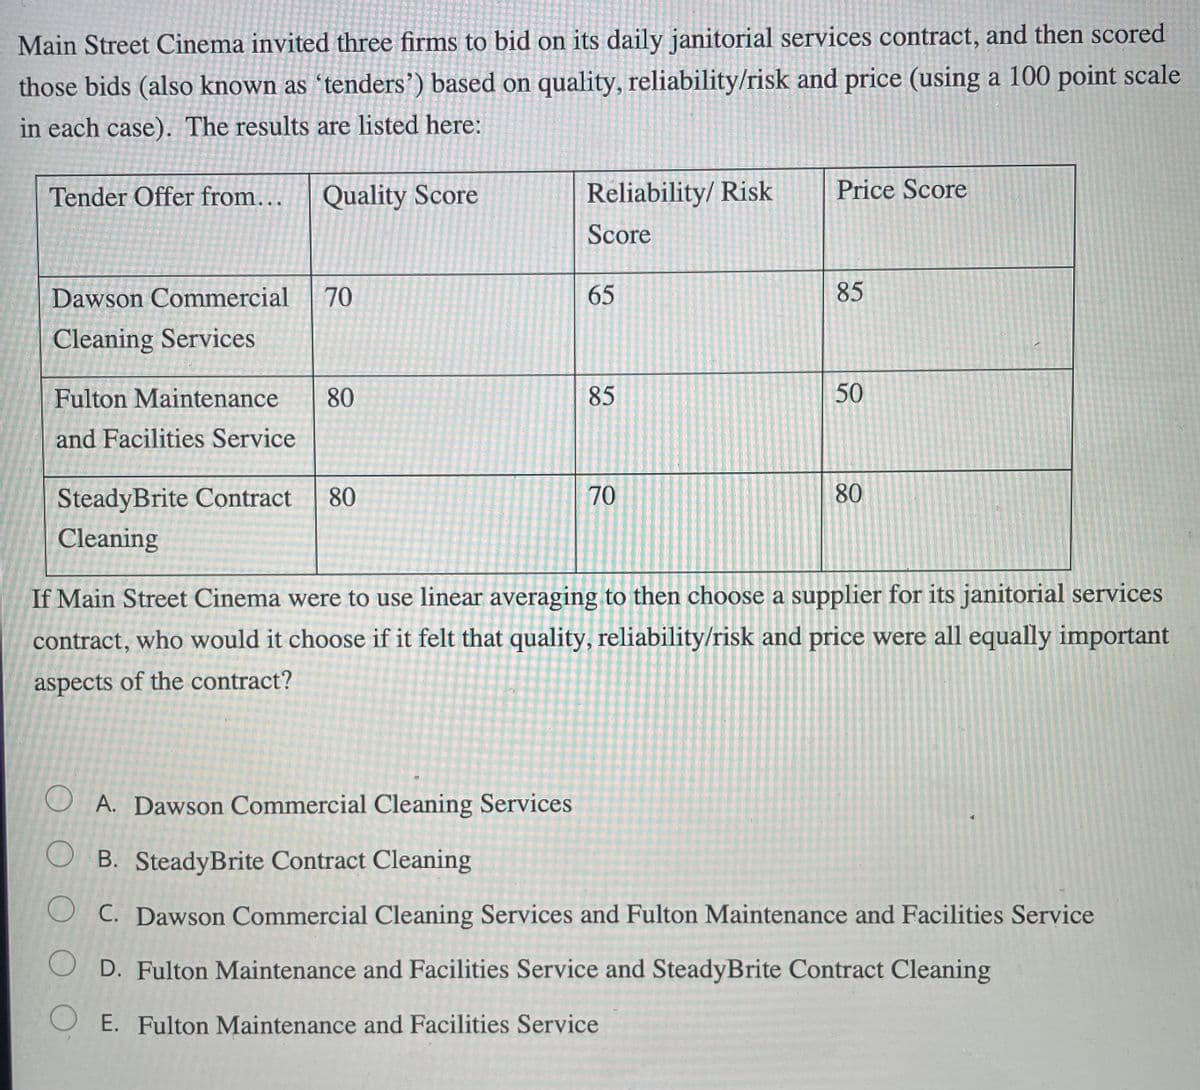 Main Street Cinema invited three firms to bid on its daily janitorial services contract, and then scored
those bids (also known as ´tenders’) based on quality, reliability/risk and price (using a 100 point scale
in each case). The results are listed here:
Tender Offer from...
Quality Score
Reliability/ Risk
Price Score
Score
Dawson Commercial
70
65
85
Cleaning Services
Fulton Maintenance
80
85
50
and Facilities Service
70
80
SteadyBrite Contract
Cleaning
80
If Main Street Cinema were to use linear averaging to then choose a supplier for its janitorial services
contract, who would it choose if it felt that quality, reliability/risk and price were all equally important
aspects of the contract?
O A. Dawson Commercial Cleaning Services
O B. SteadyBrite Contract Cleaning
O C. Dawson Commercial Cleaning Services and Fulton Maintenance and Facilities Service
O D. Fulton Maintenance and Facilities Service and SteadyBrite Contract Cleaning
E. Fulton Maintenance and Facilities Service
